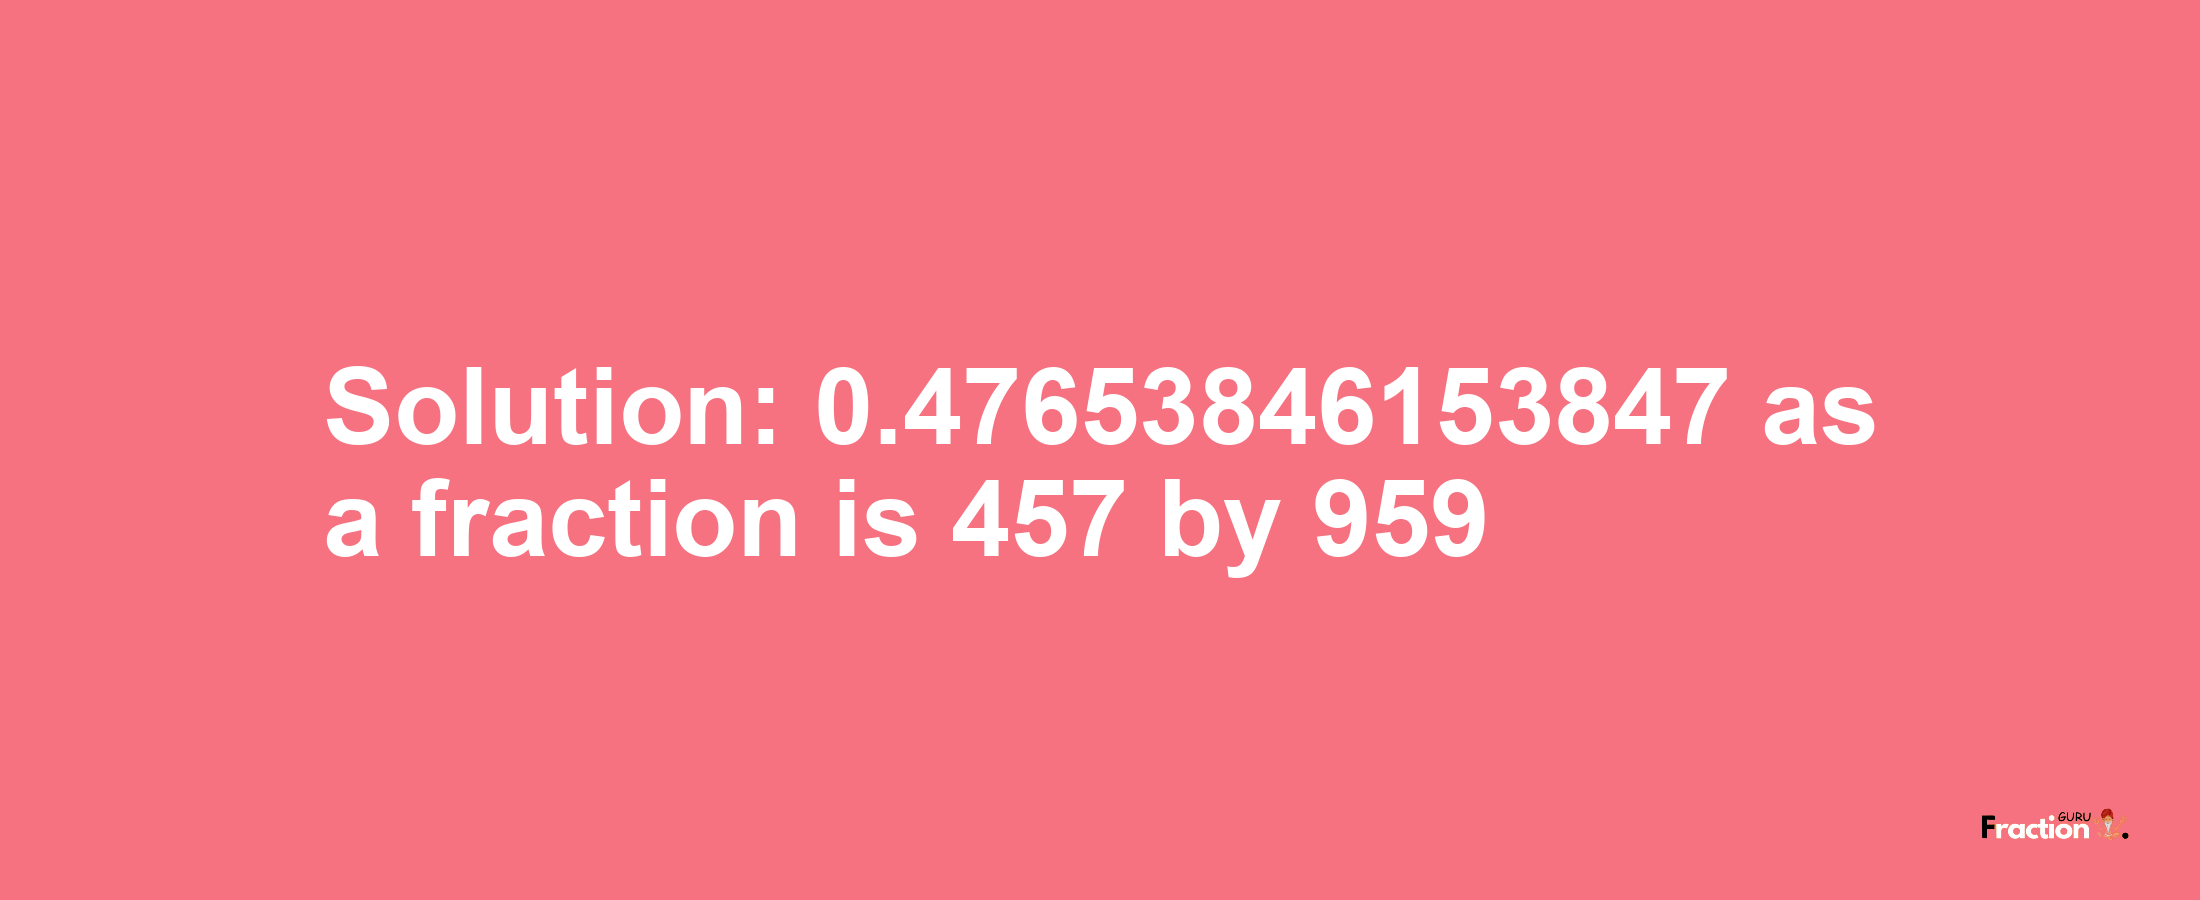 Solution:0.47653846153847 as a fraction is 457/959